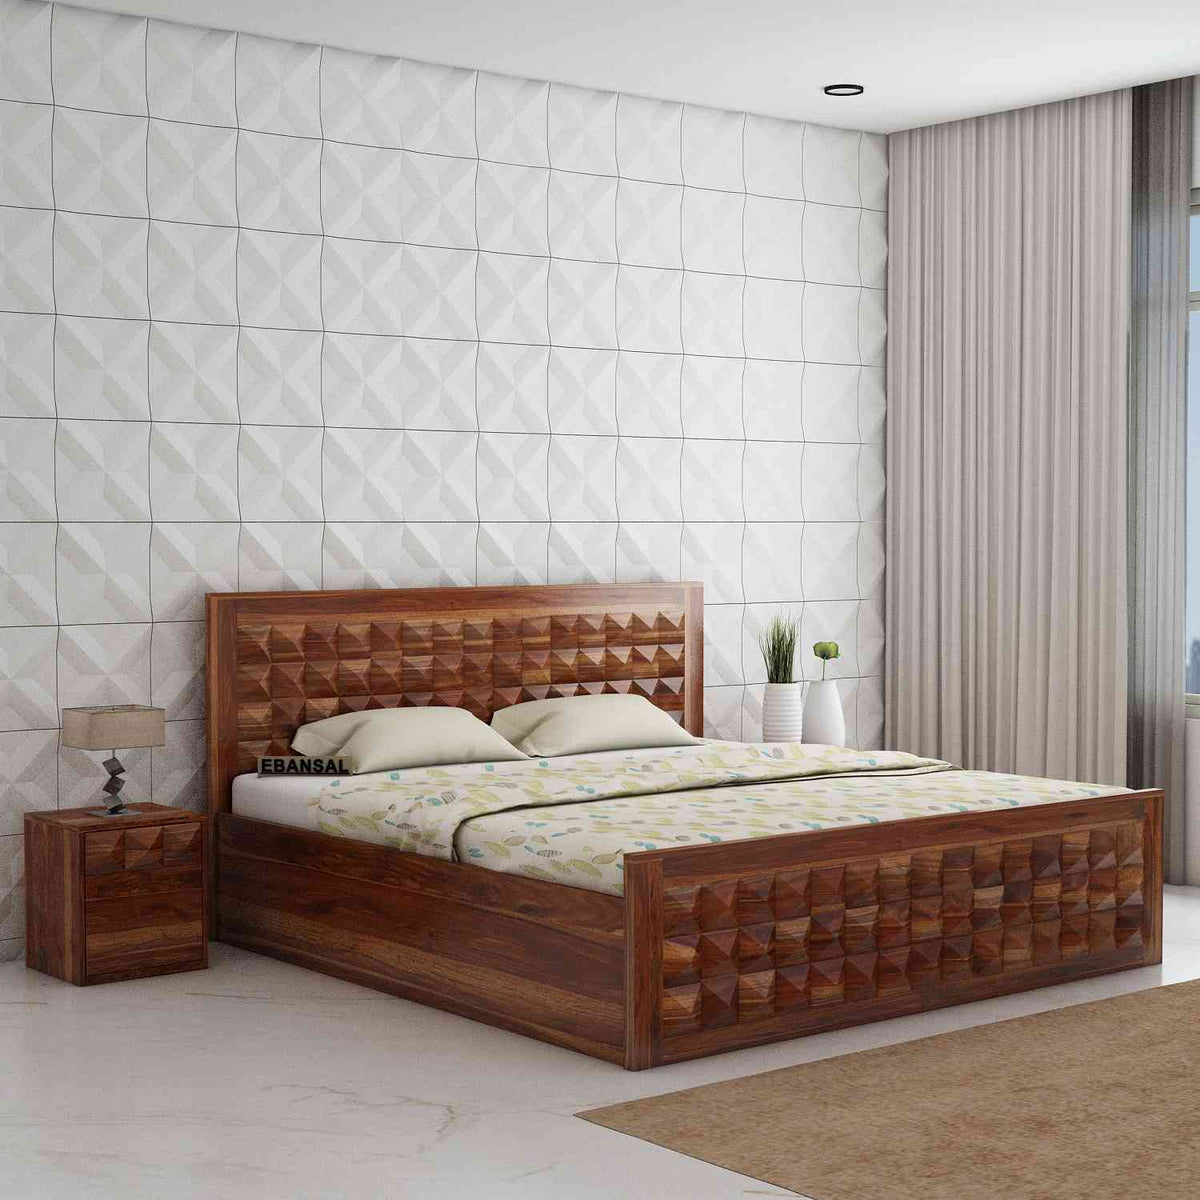 Sofia Solid Sheesham Wood Bed With Box Storage (Queen Size, Natural Finish)